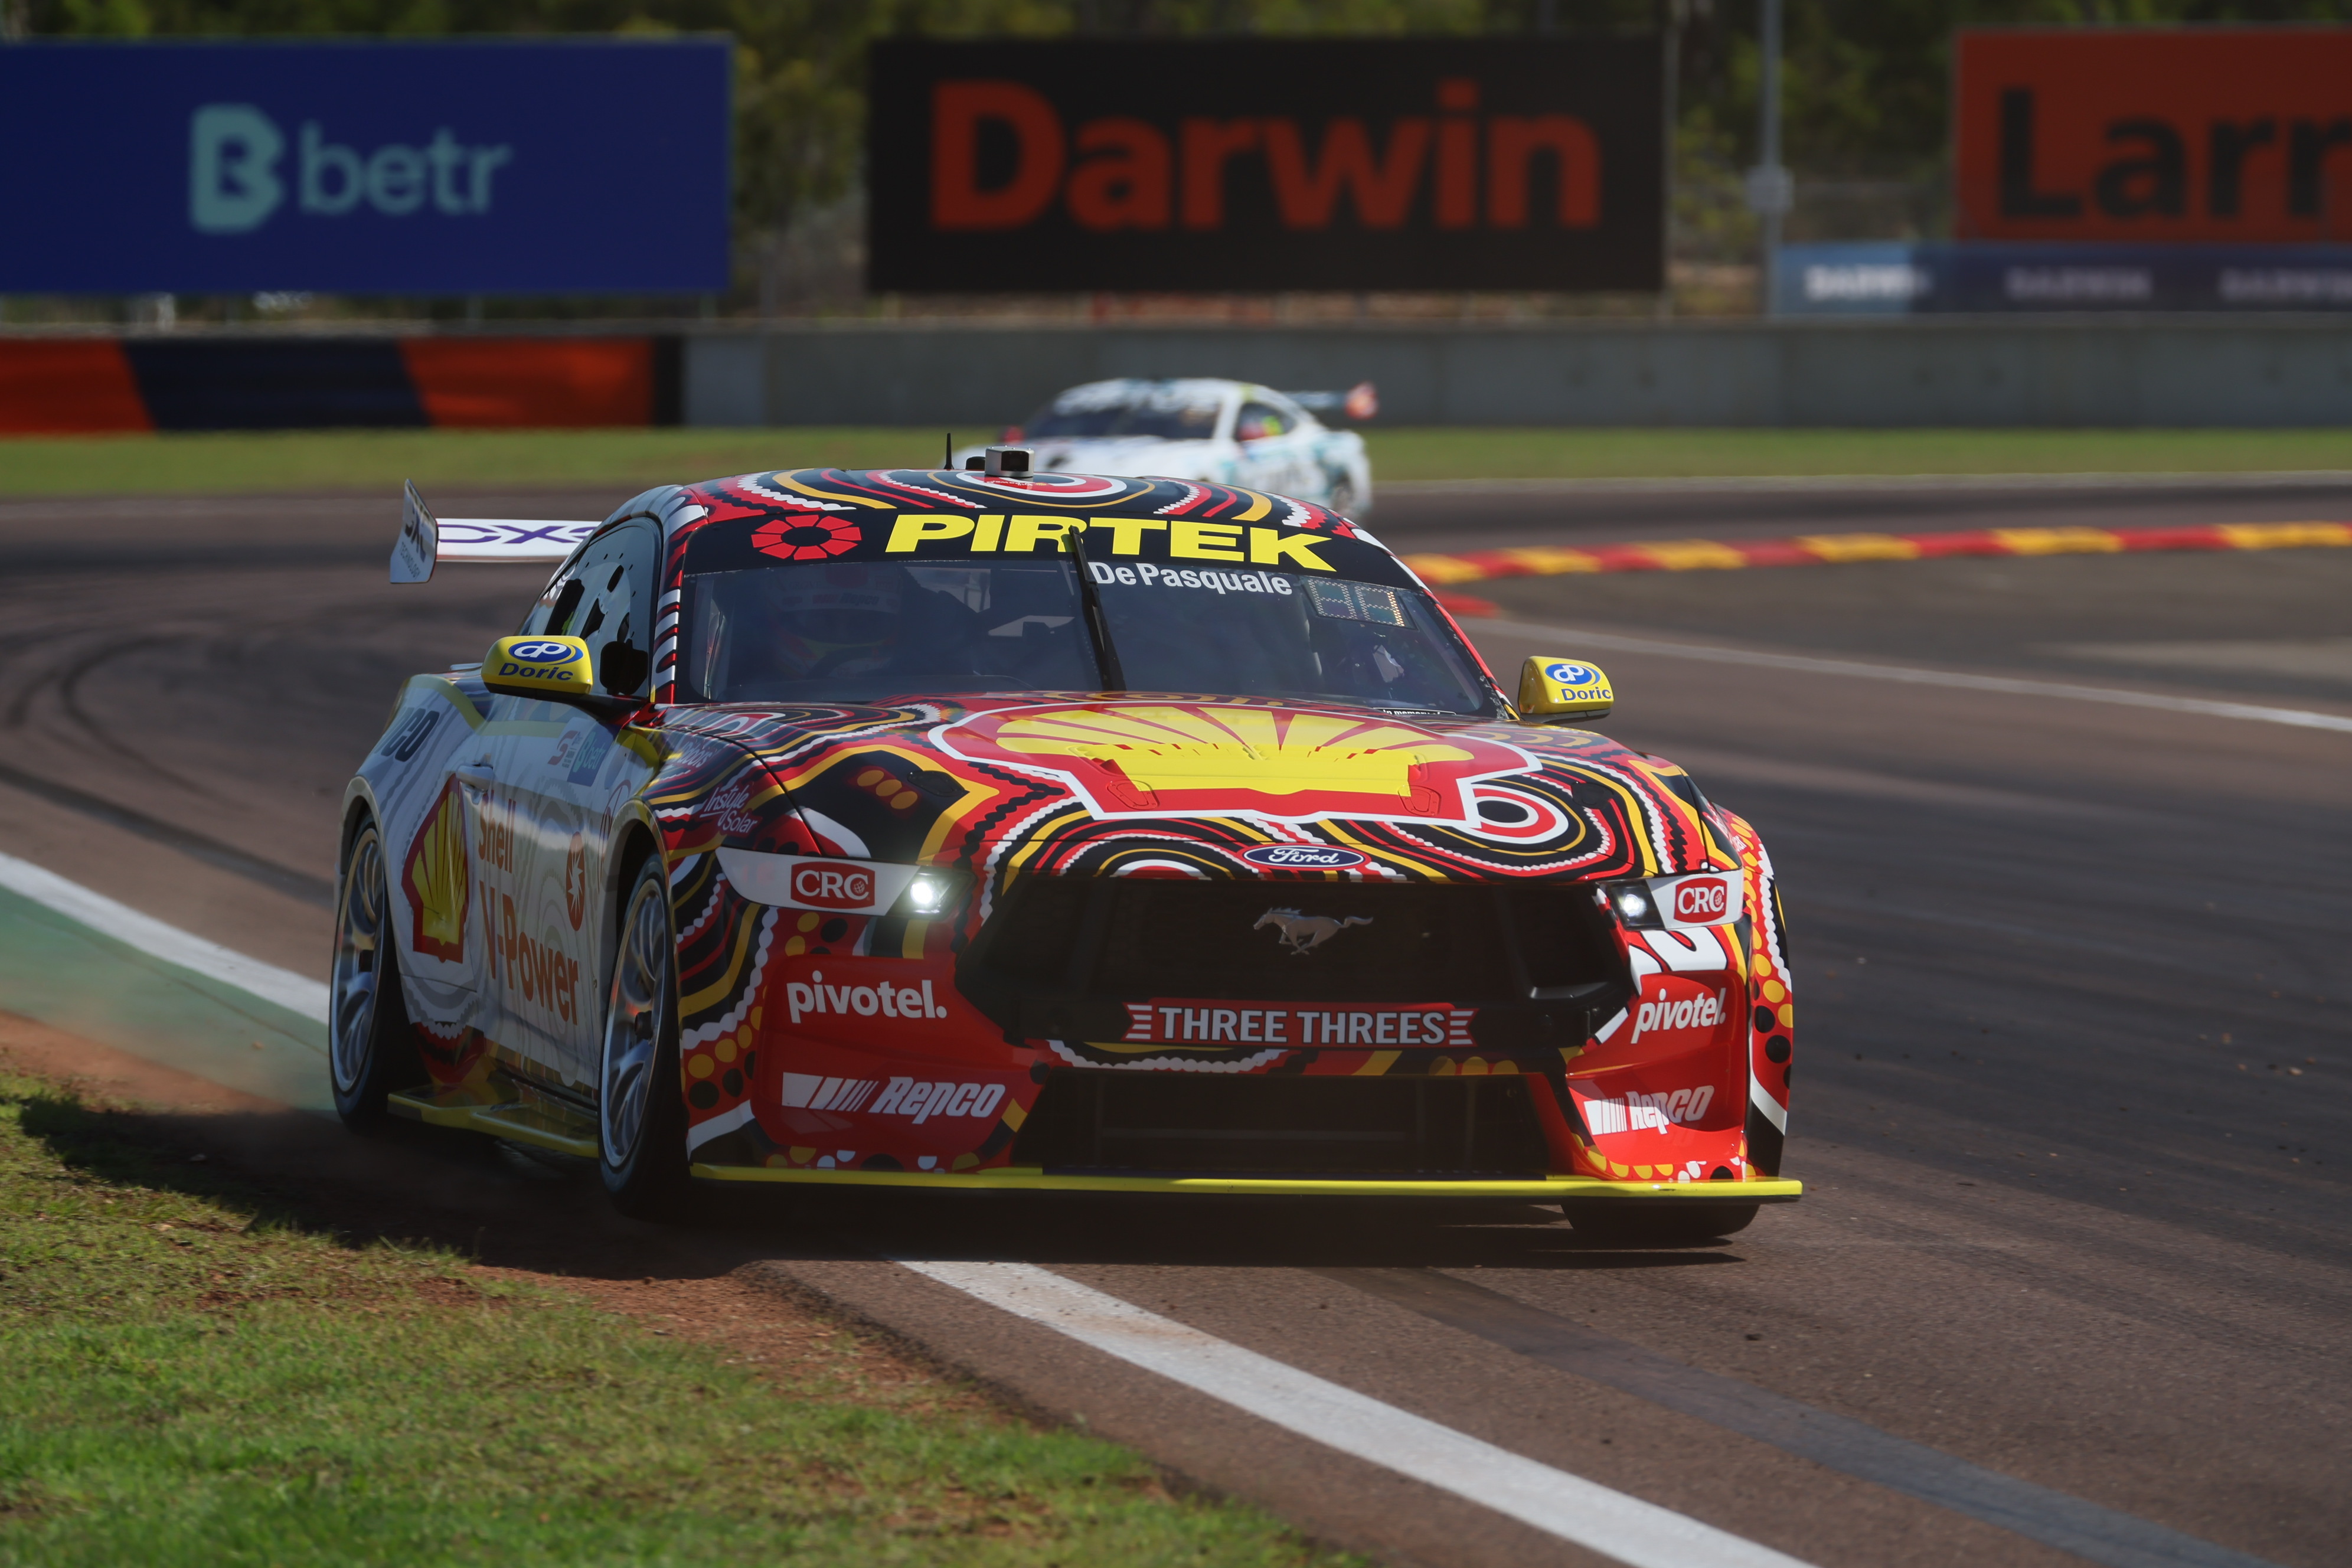 De Pasquale leads Darwin practice as reigning champ struggles